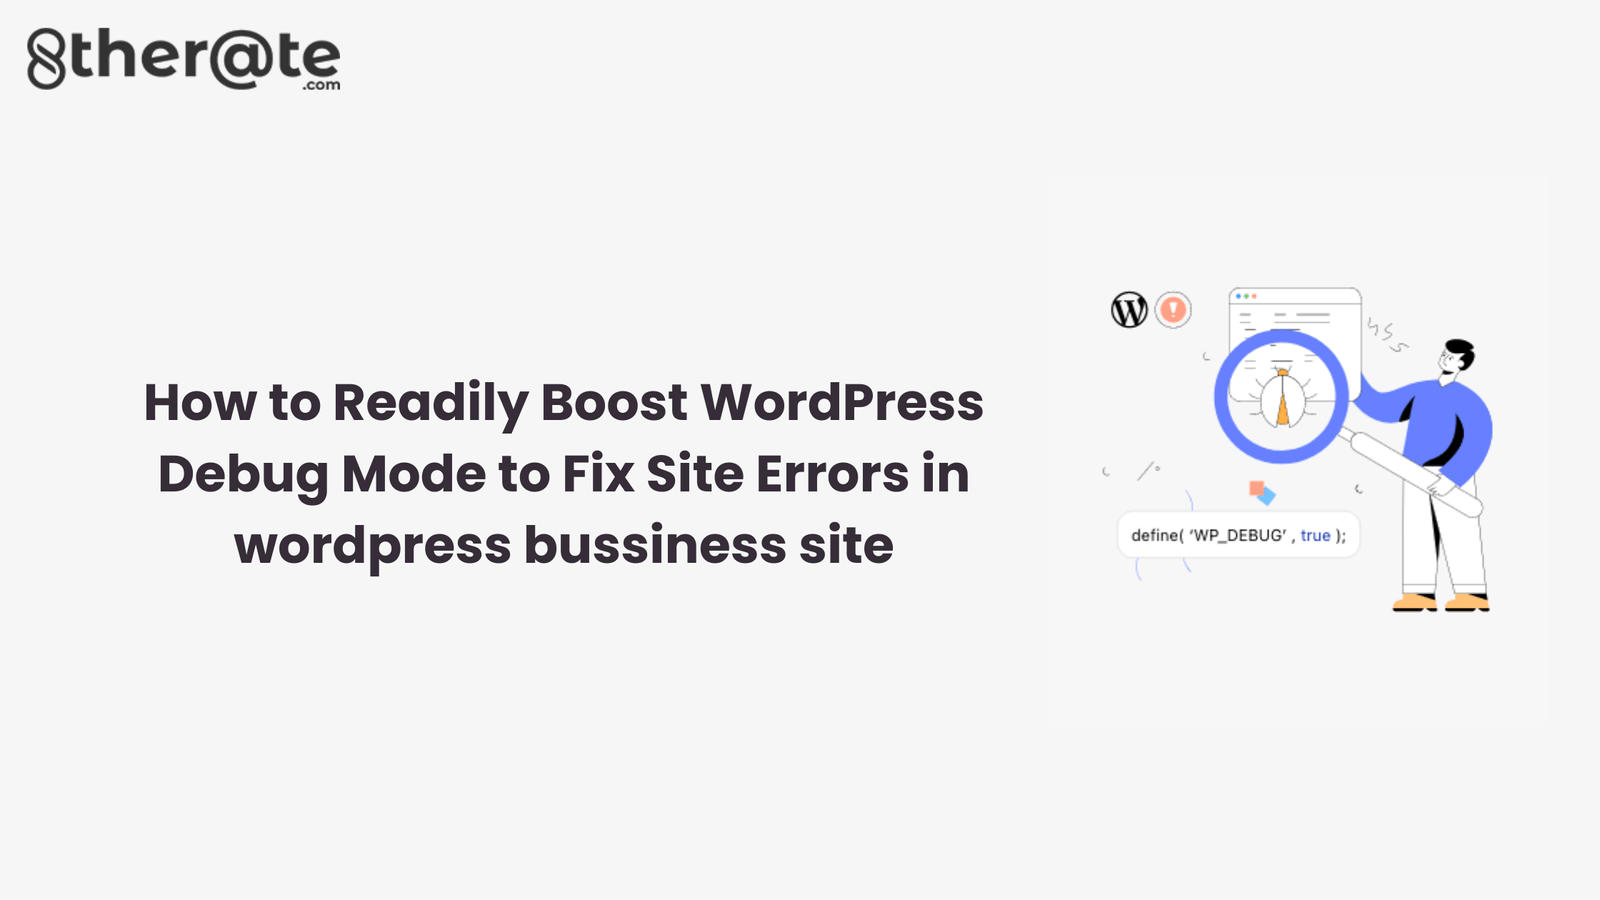 How to Readily Boost WordPress Debug Mode to Fix Site Errors in wordpress bussiness site